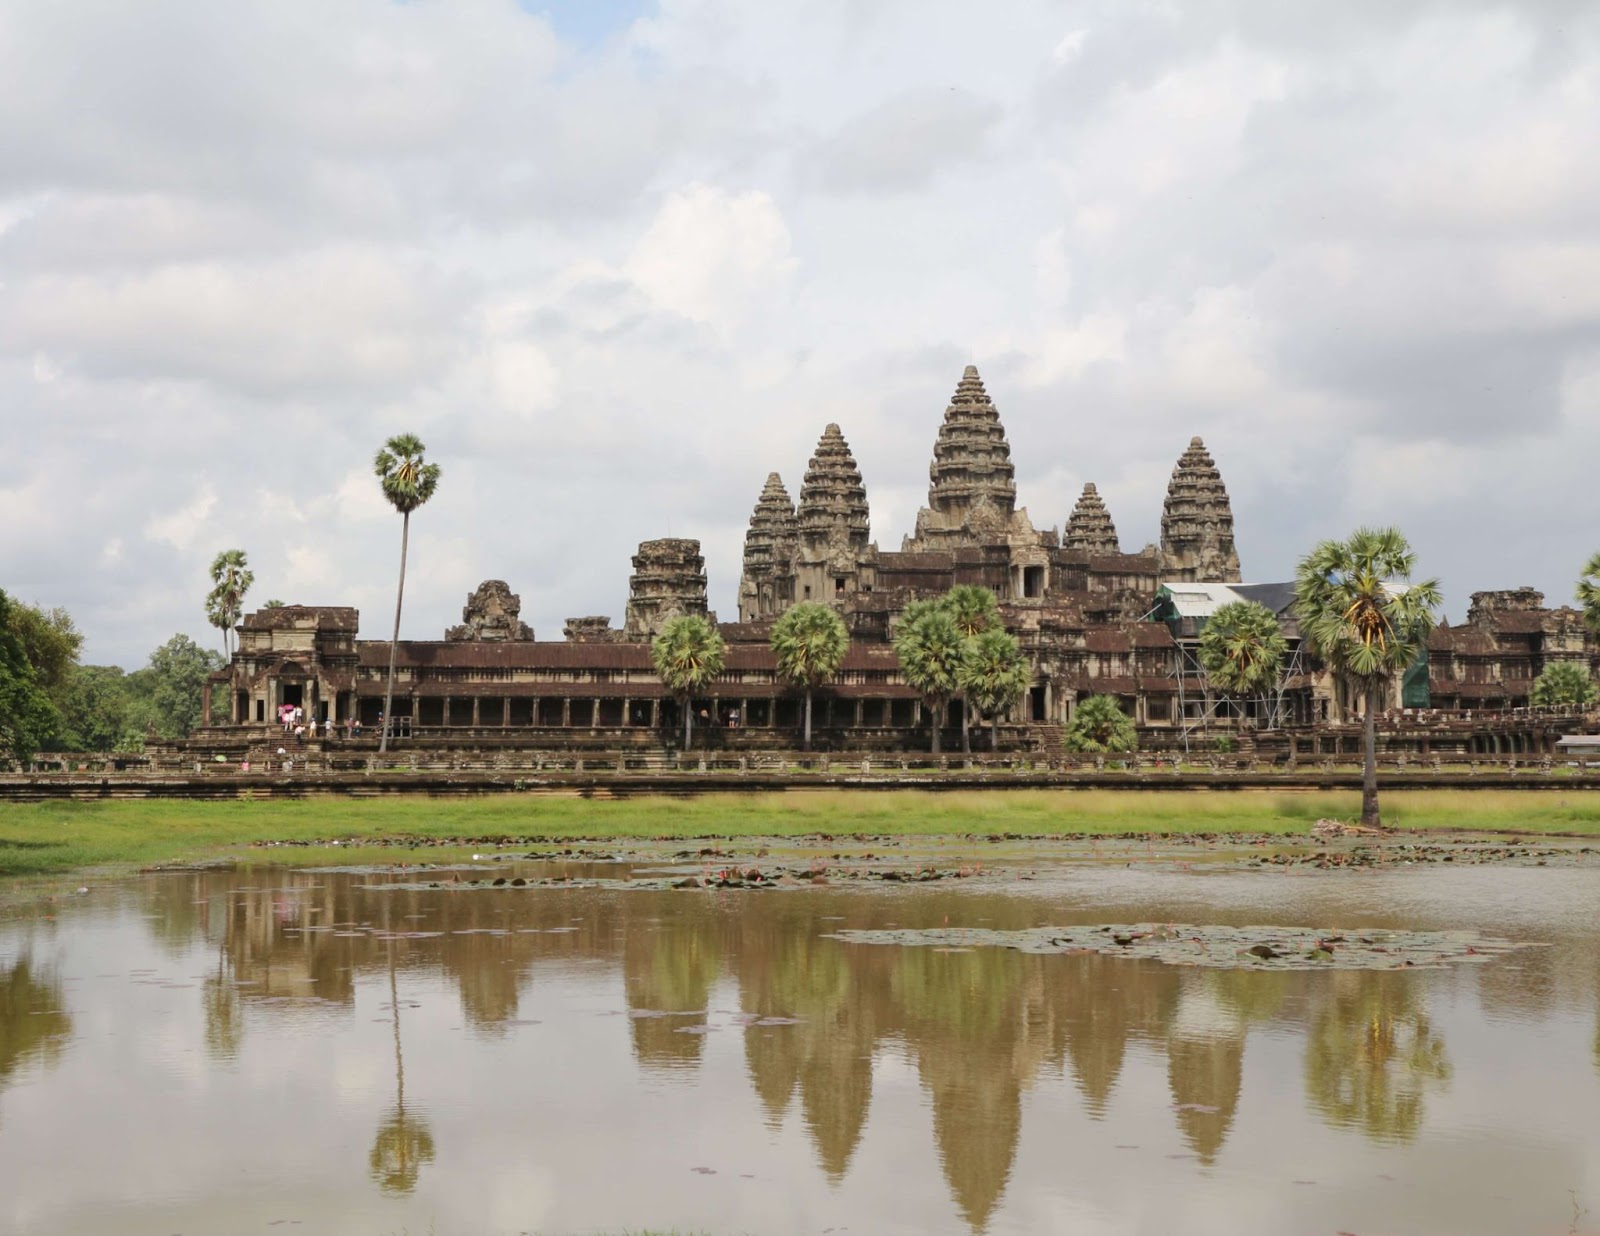 This is the reflection of Angkor Wat from one of the ponds. This is our first interesting places in Siem Reap.